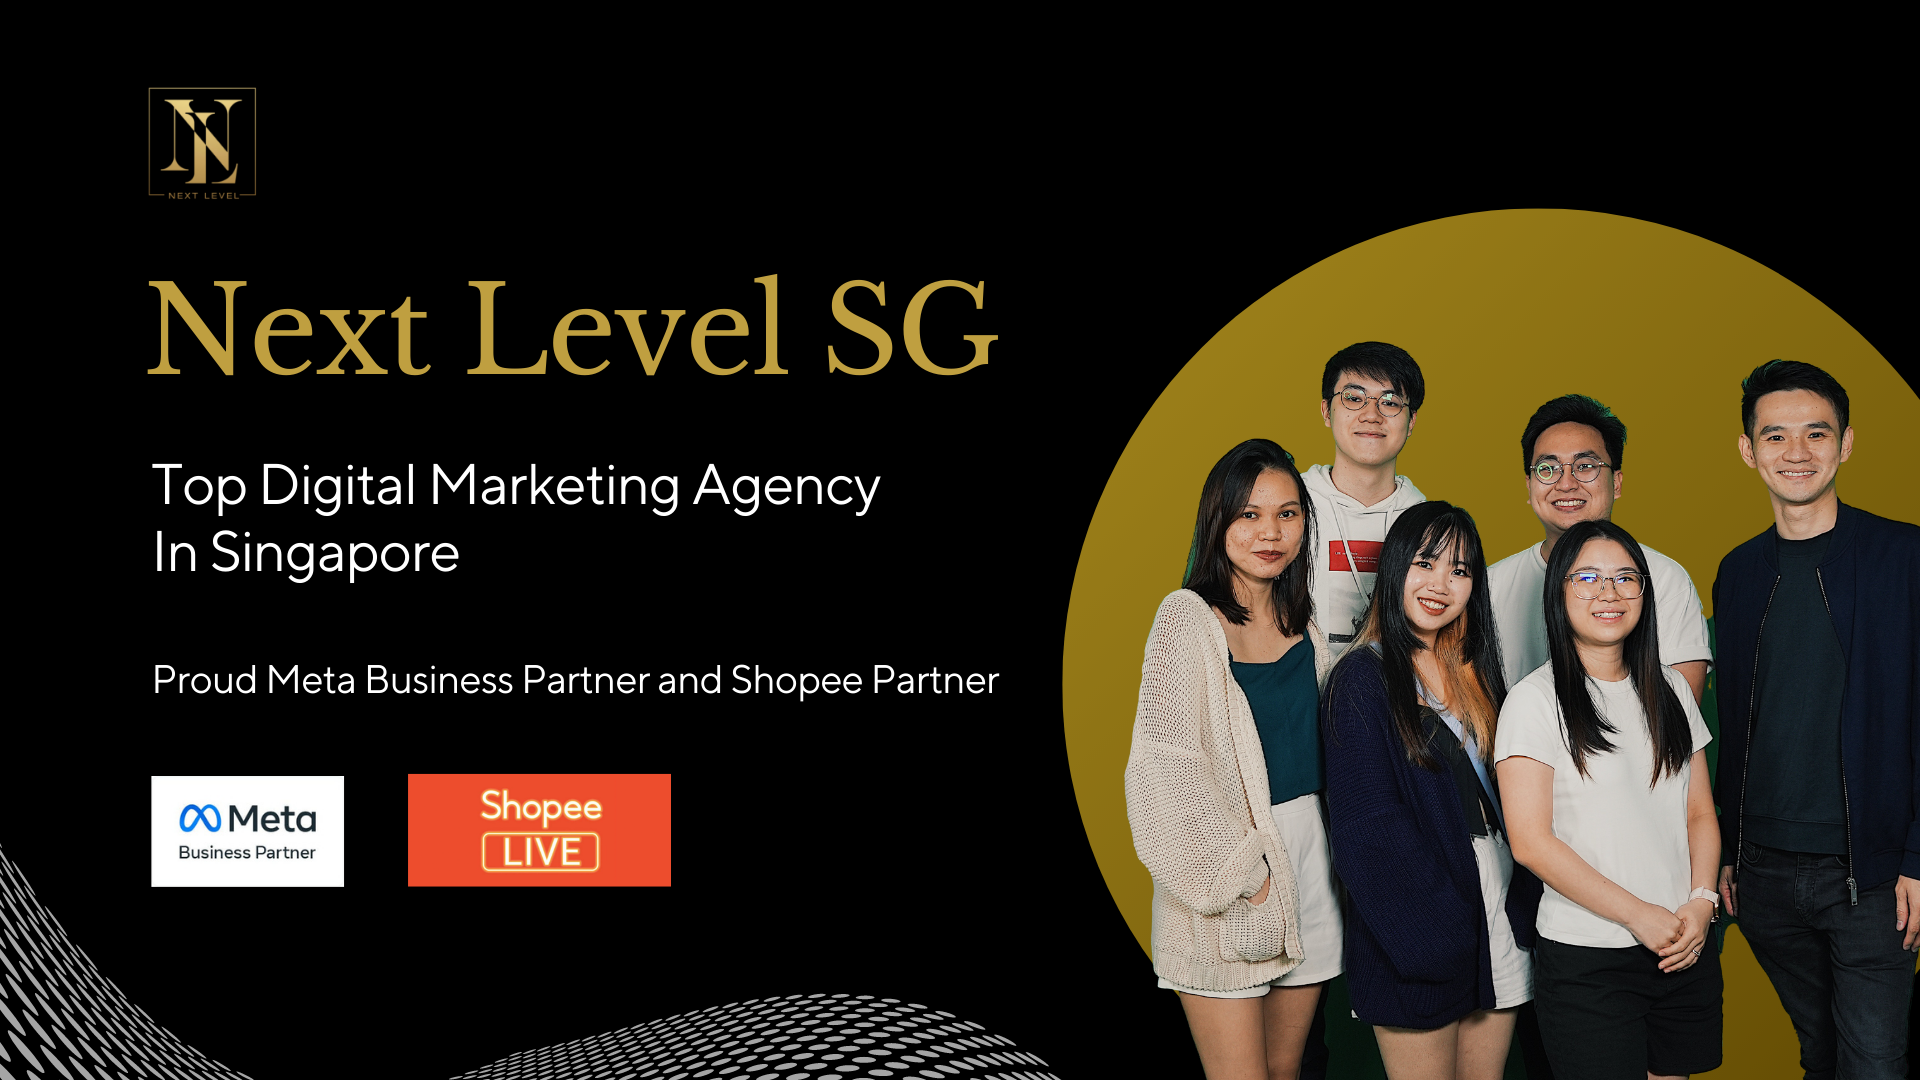 Next Level SG: One of The Top Digital Marketing Agency in Singapore that takes your business to the Next Level [2022]